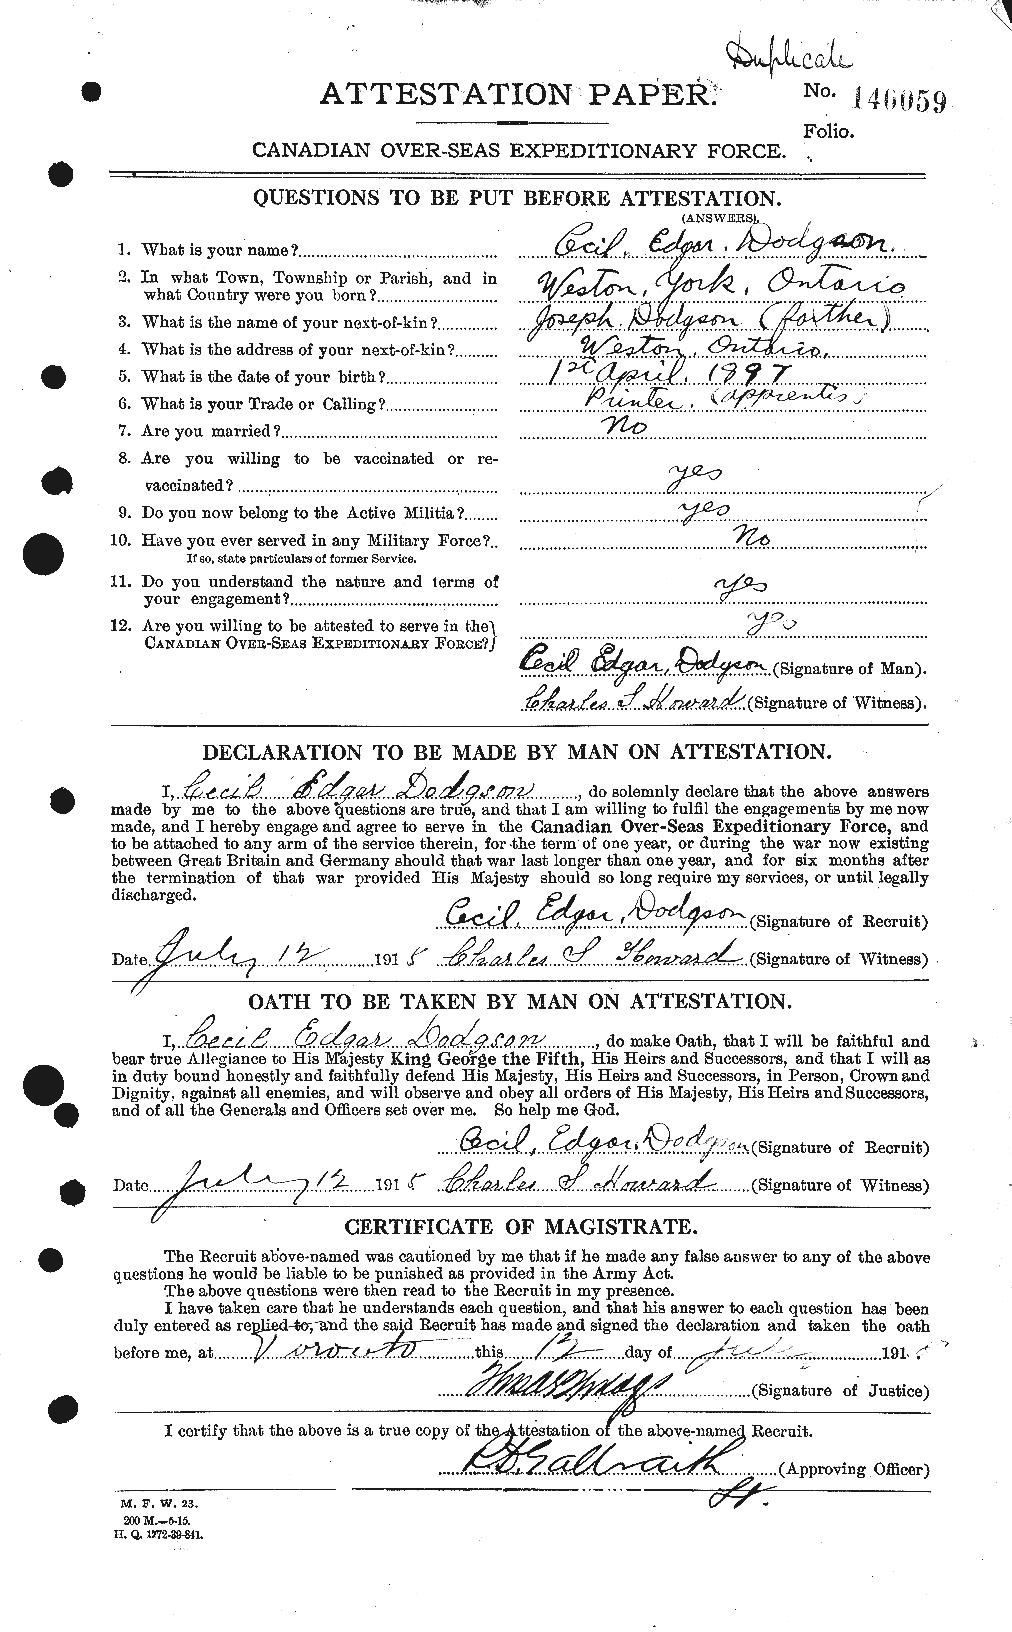 Personnel Records of the First World War - CEF 294495a